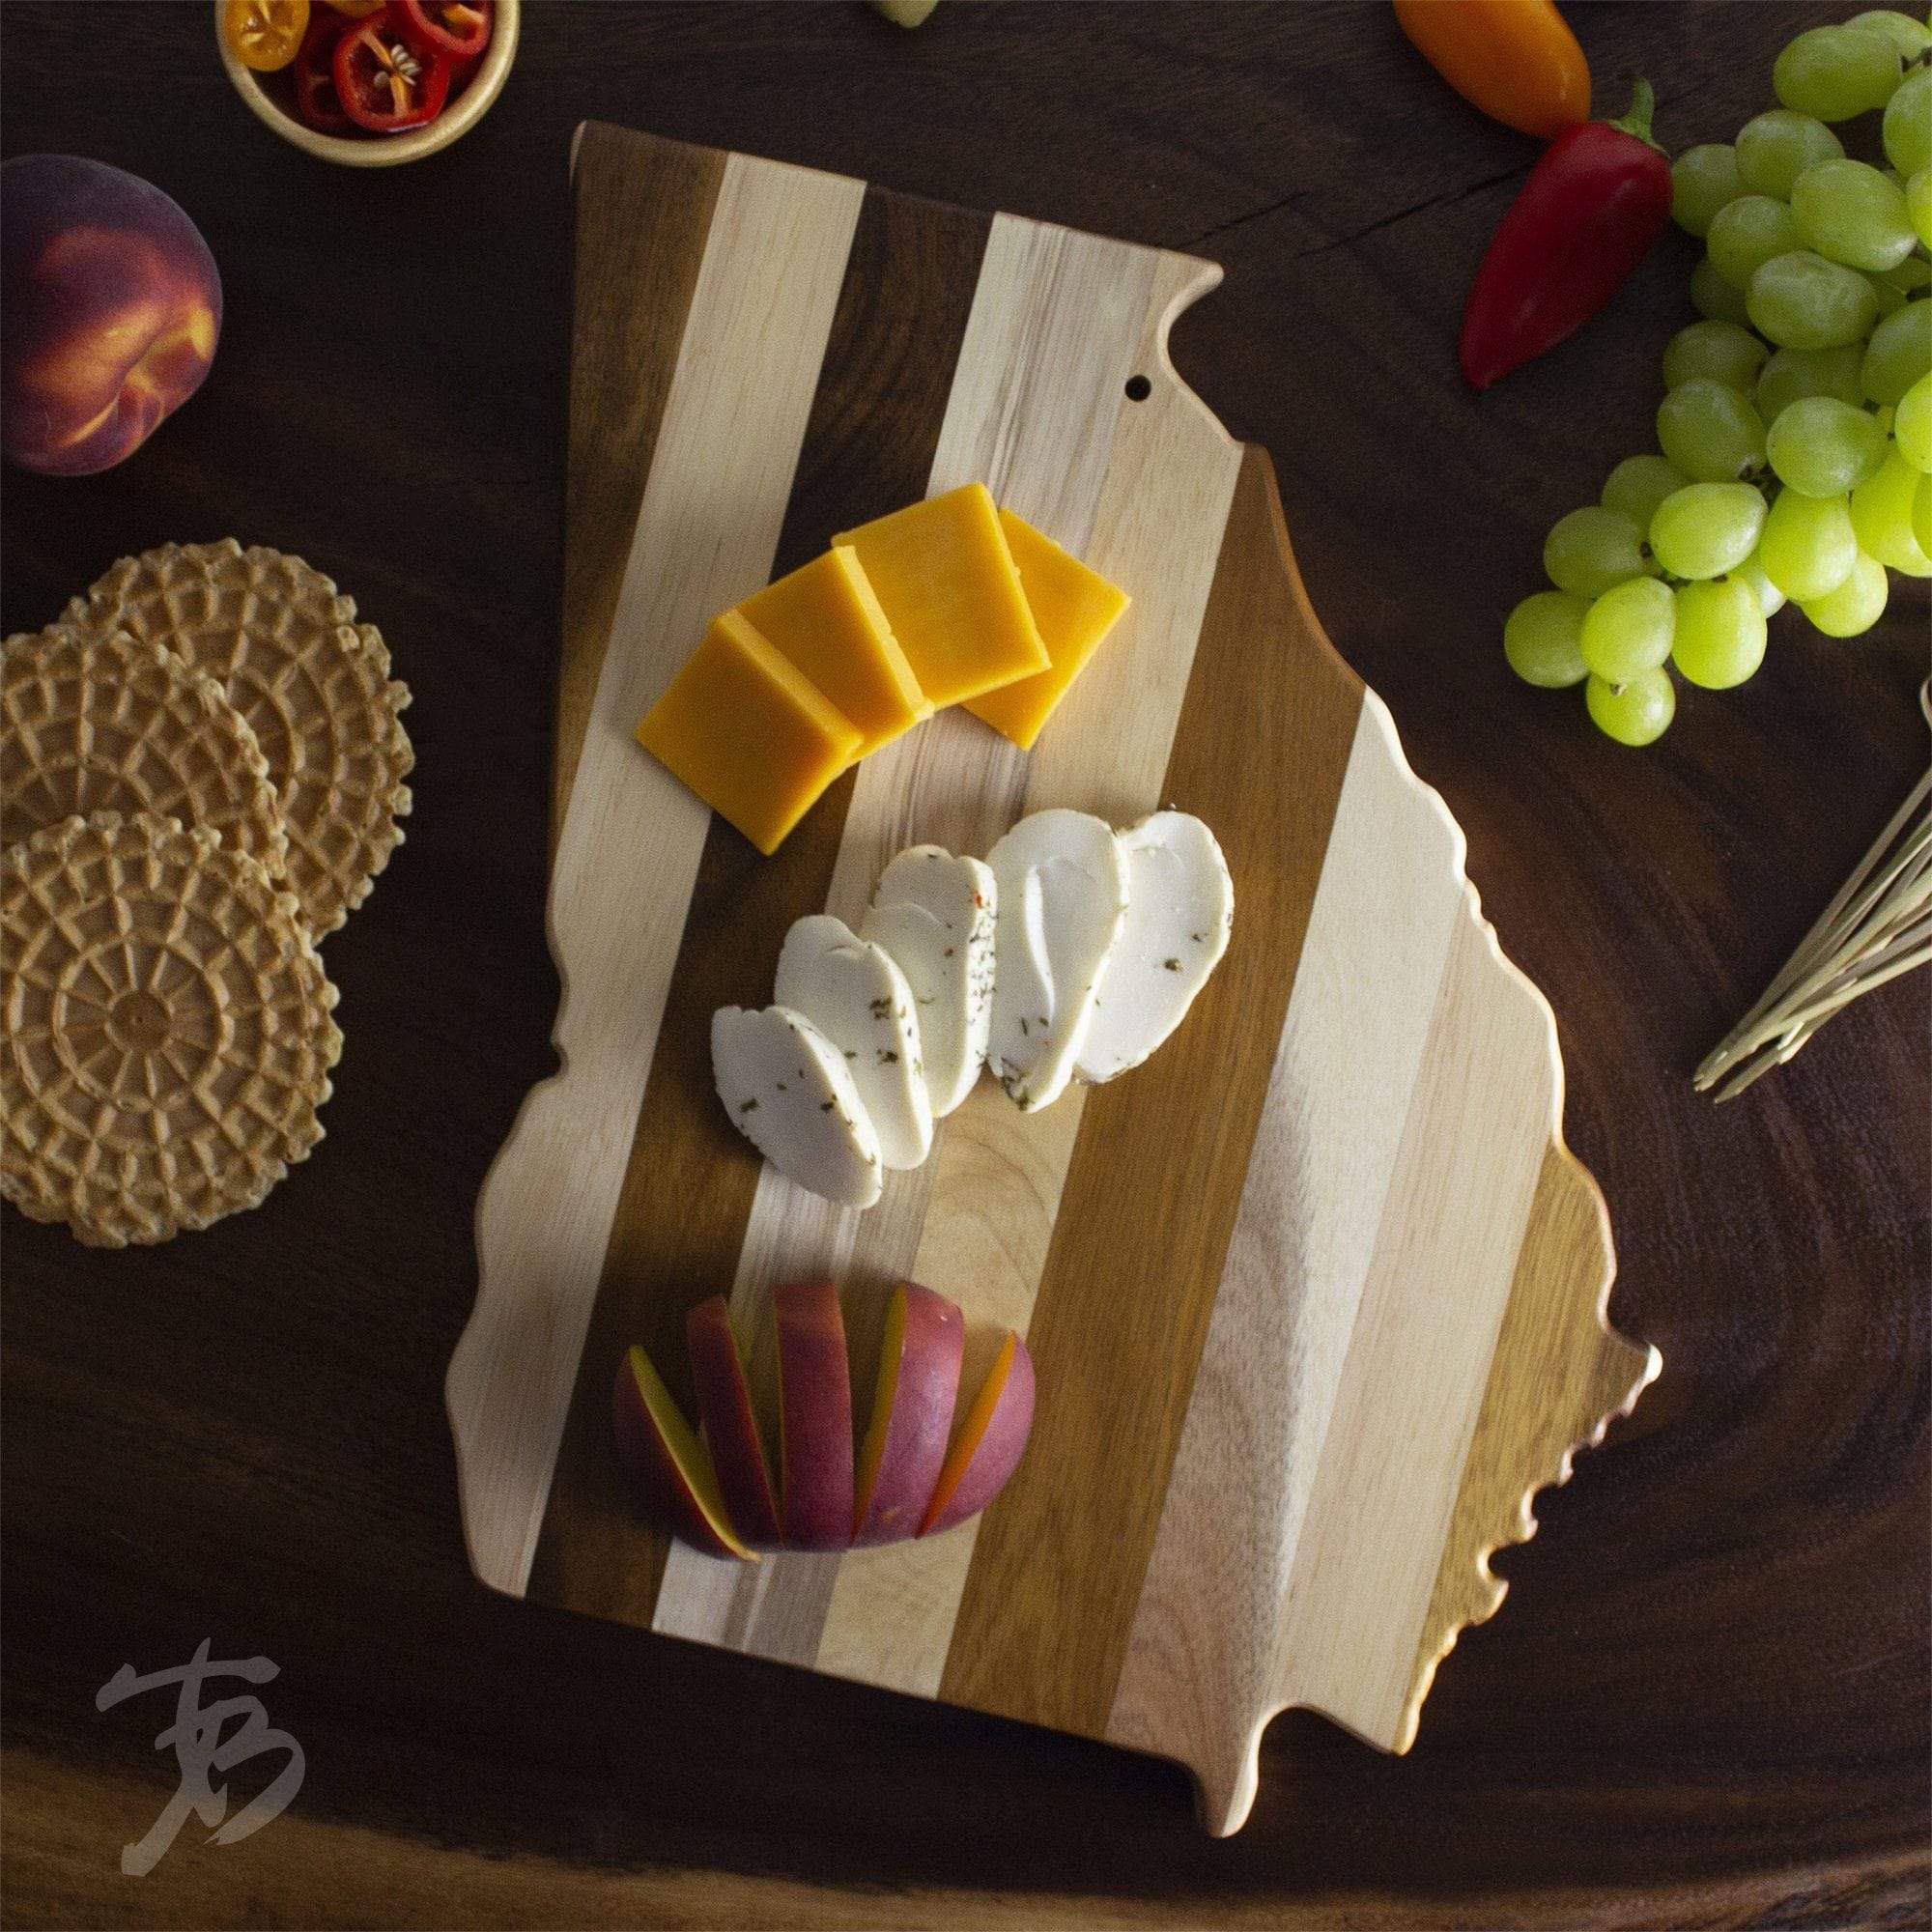 https://totallybamboo.com/cdn/shop/products/rock-branchr-shiplap-series-georgia-state-shaped-wood-serving-and-cutting-board-totally-bamboo-250888.jpg?v=1627883295